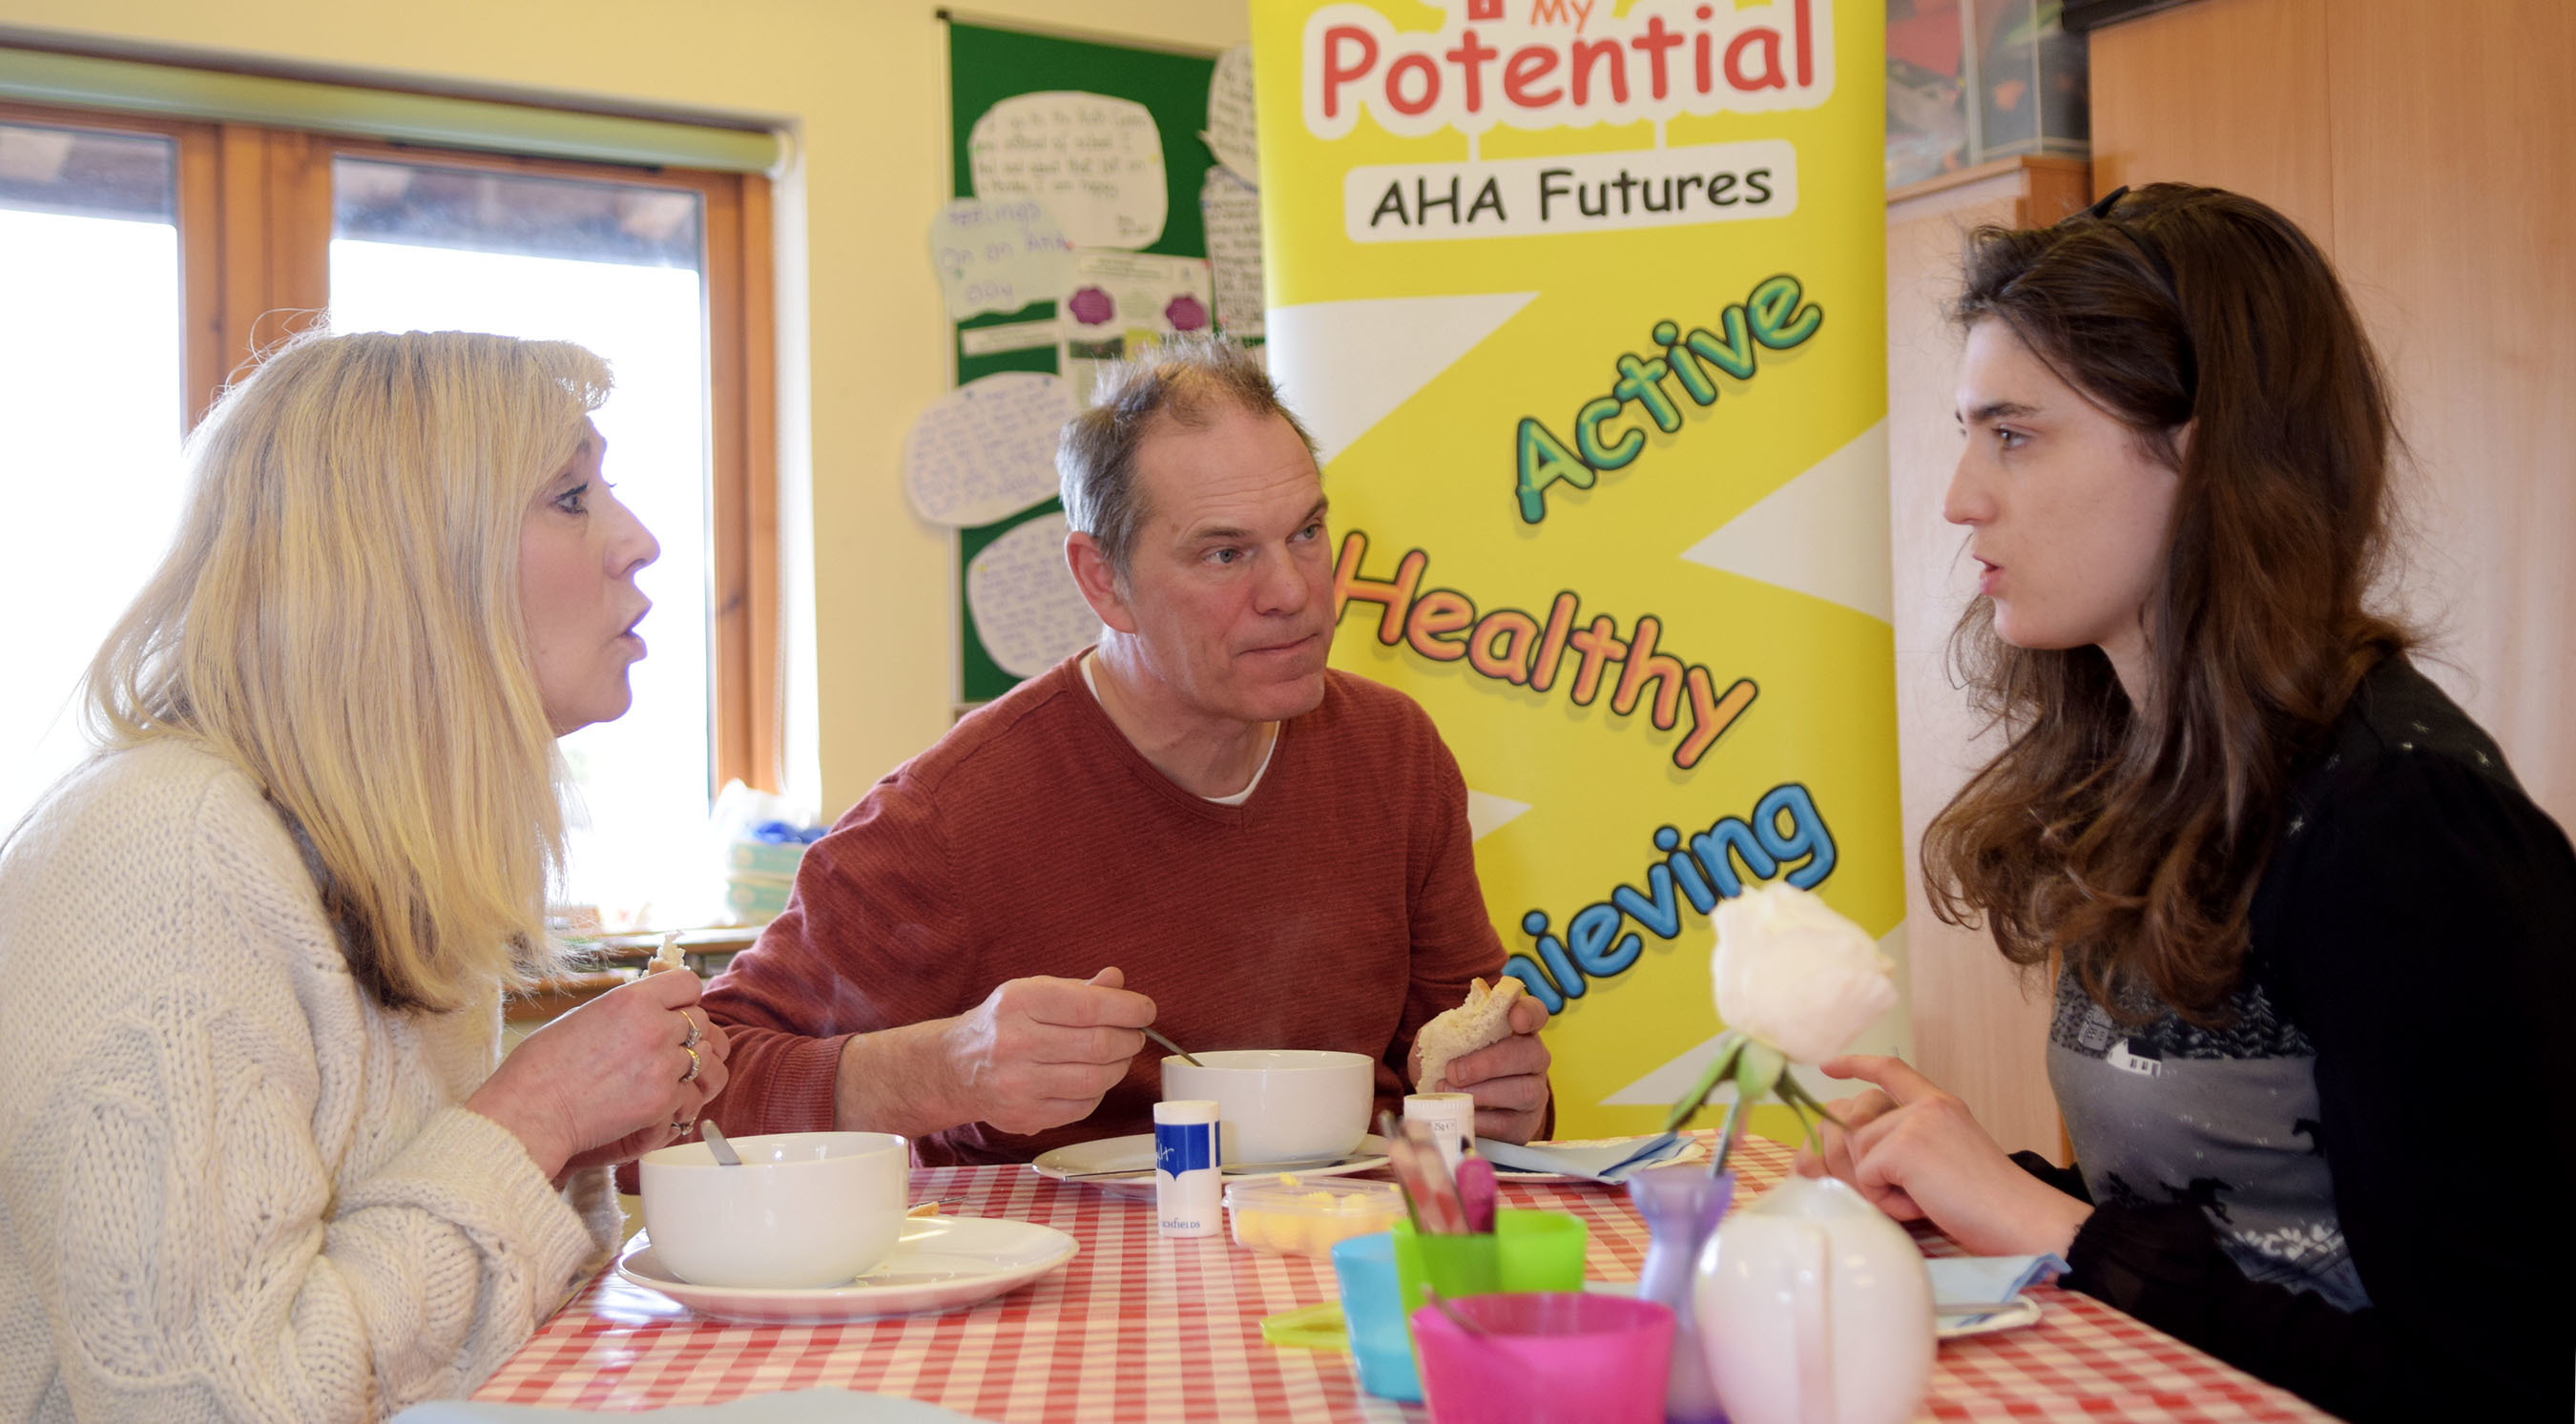 David and Marian Holden of Onich share soup and a chat with daughter Amy Kate who is also a participant in the AHA (Healthy, Active, Achieving) project